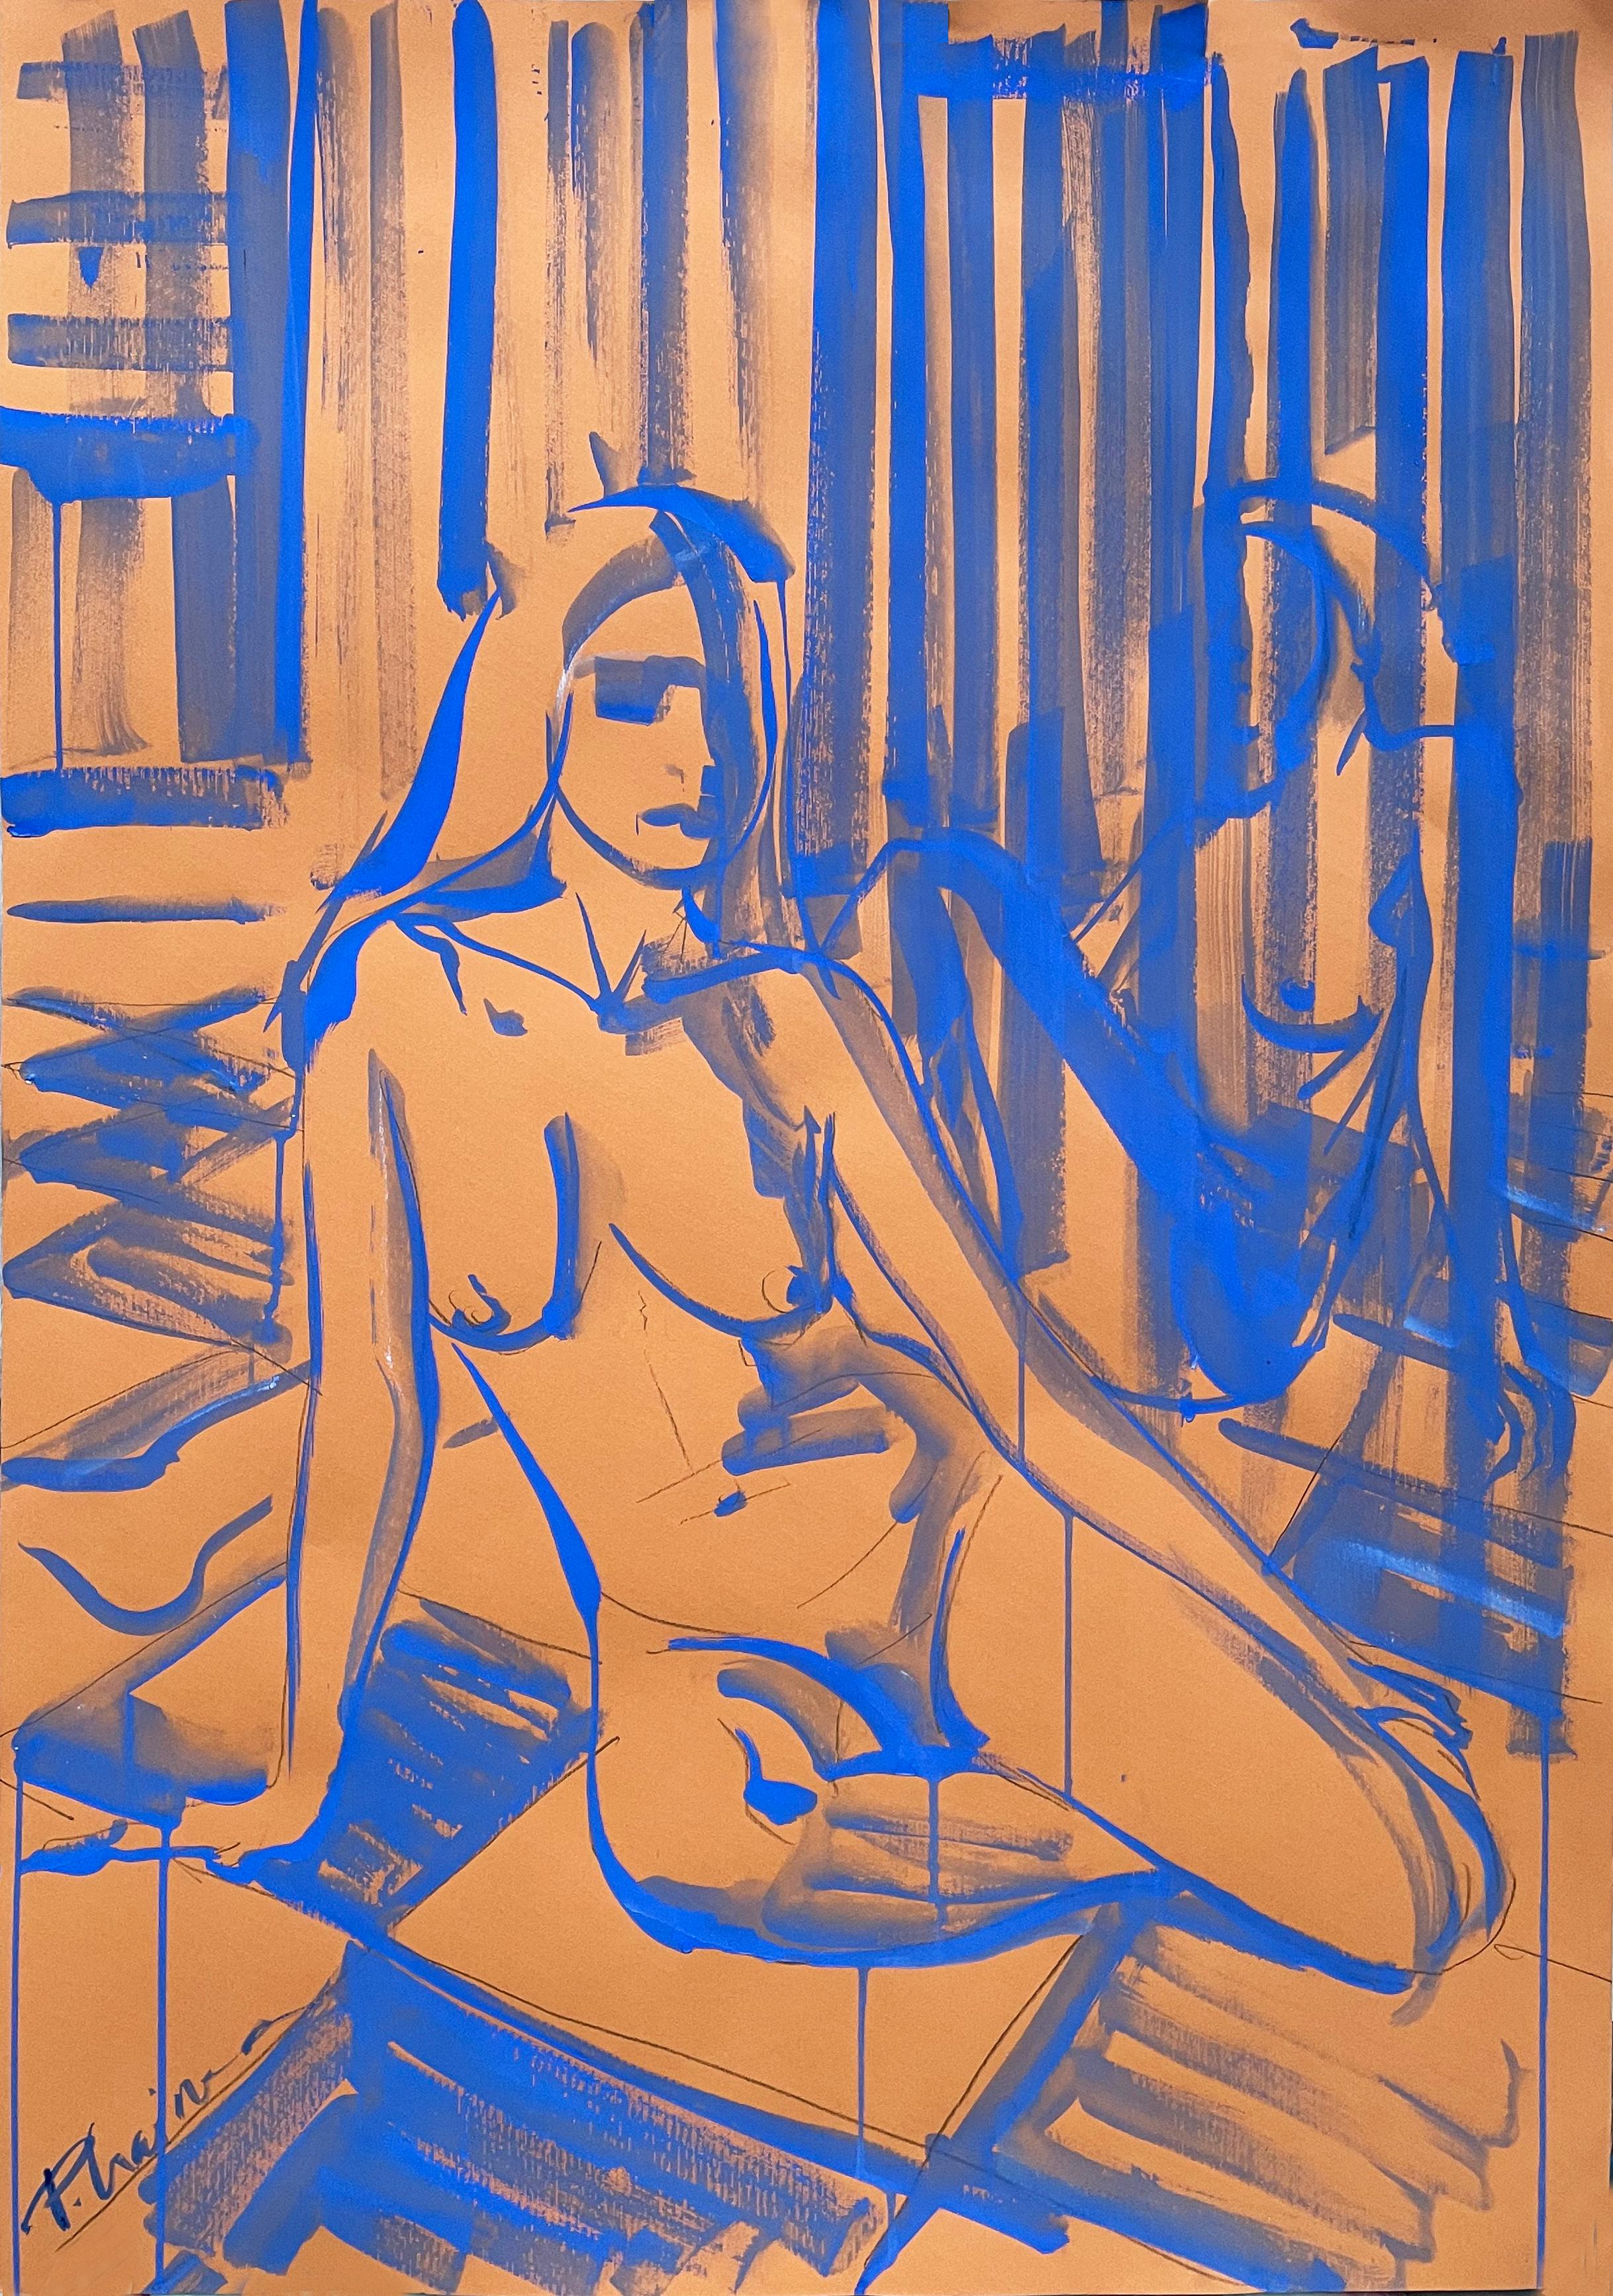 Nude on Chessed Floor, pencil and ultramarine tempera on paper, inspired by Matisse.
Part of Nude in Interior series.
Large drawing. Shipped rolled in a tube, directly from the artist's studio.

Artist Statement
"I started by painting interiors,